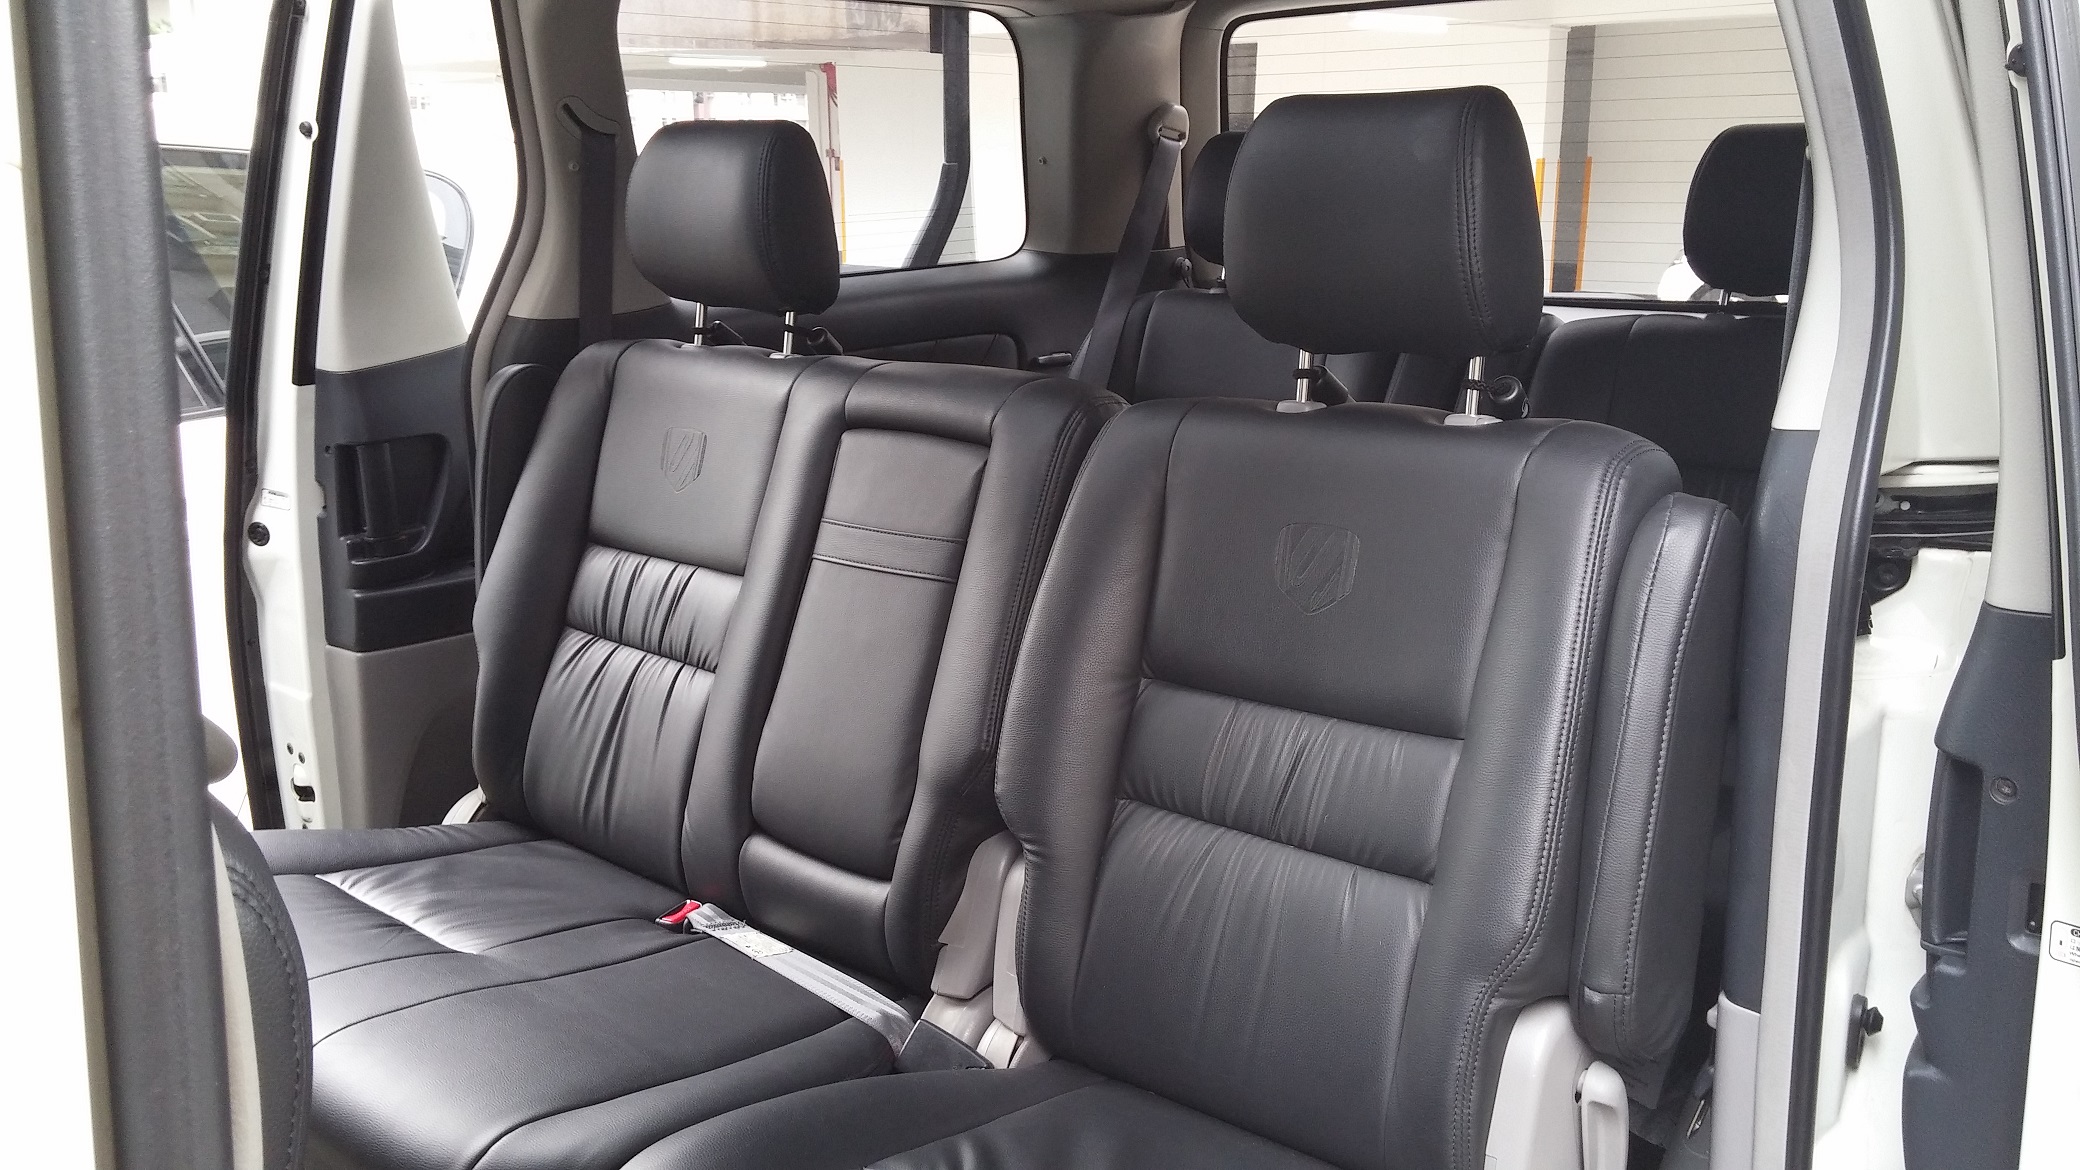 Alphard middle row seating